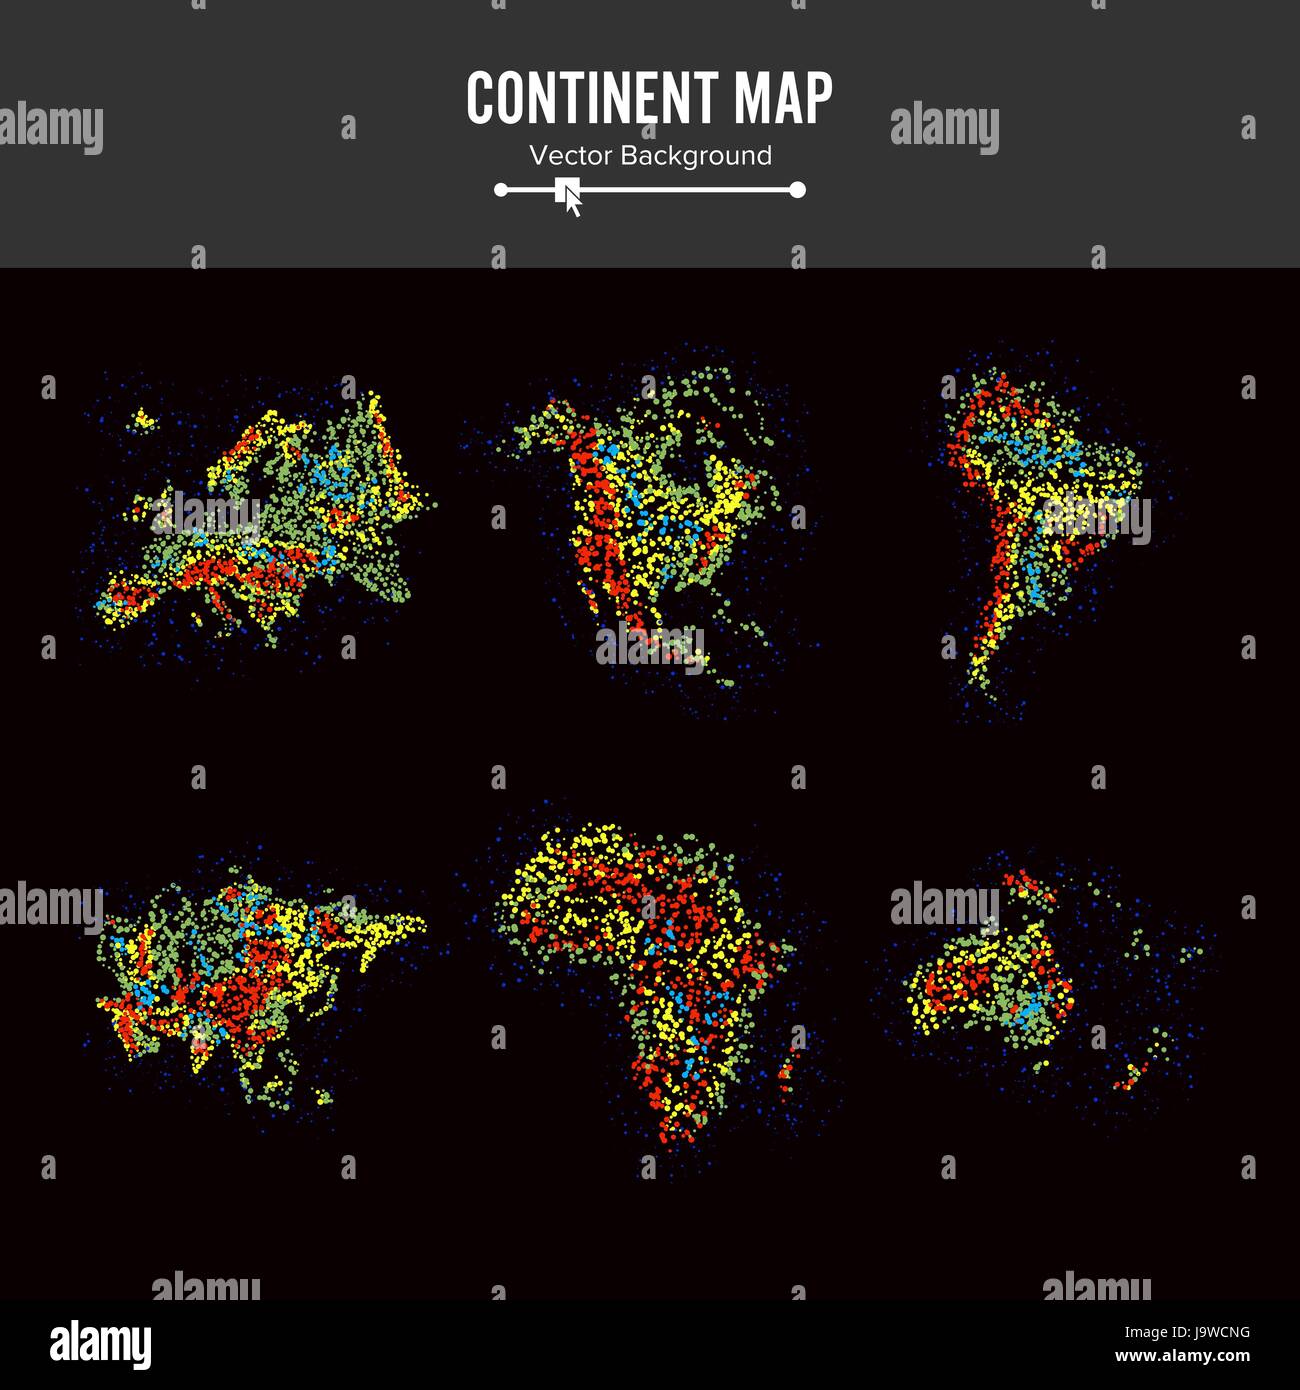 Continent Maps. Abstract Background Vector. Colorful Dots Isolated On Black Stock Vector